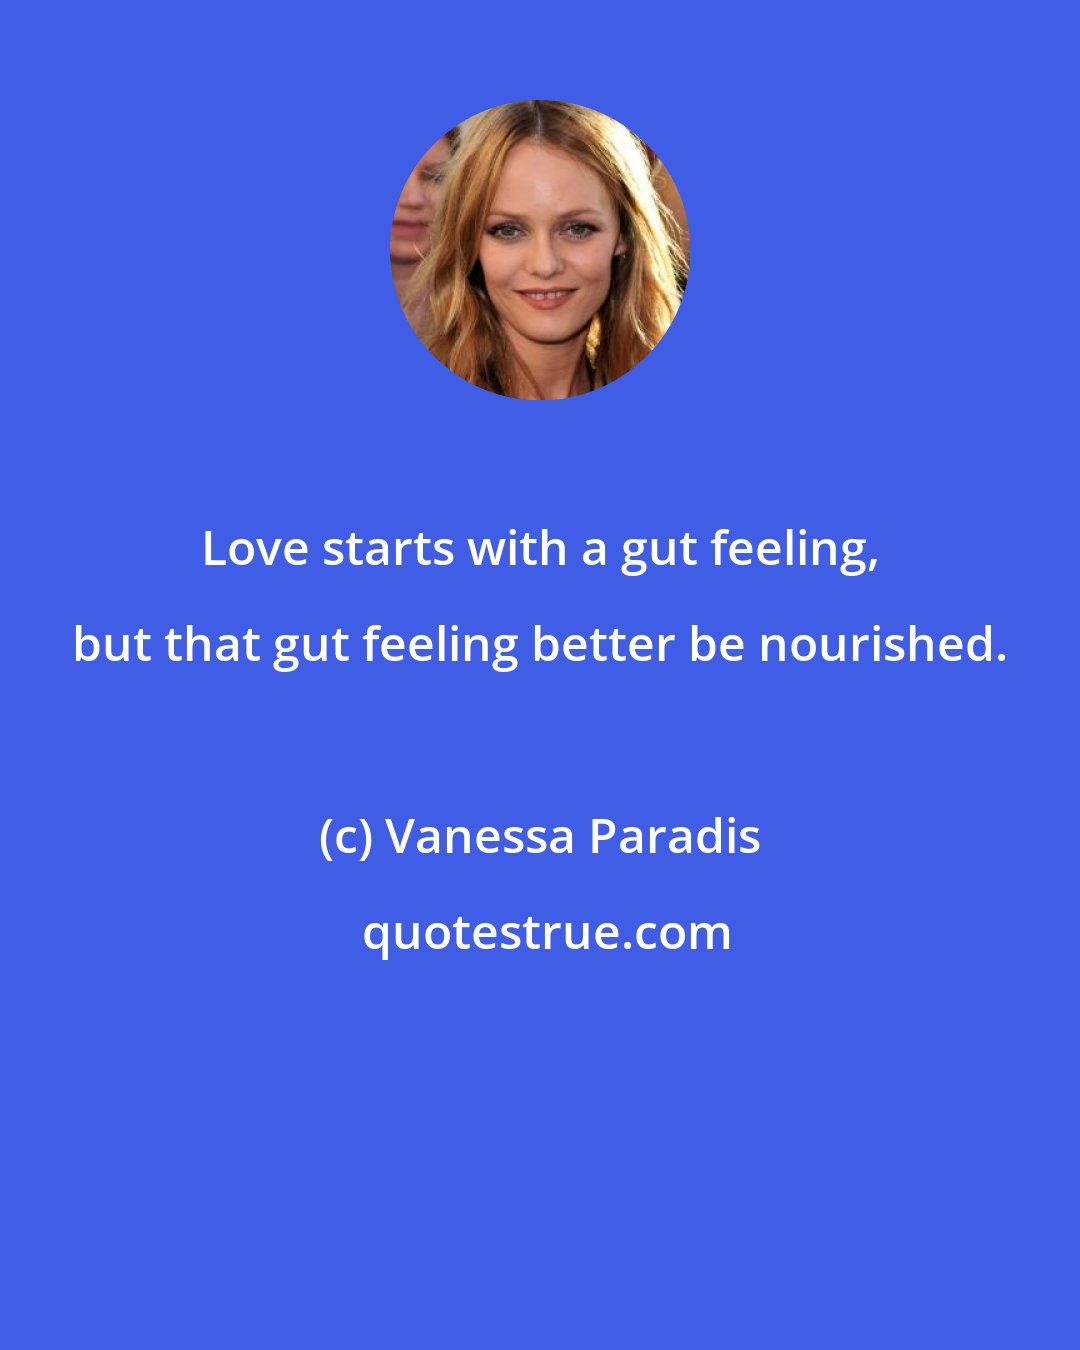 Vanessa Paradis: Love starts with a gut feeling, but that gut feeling better be nourished.